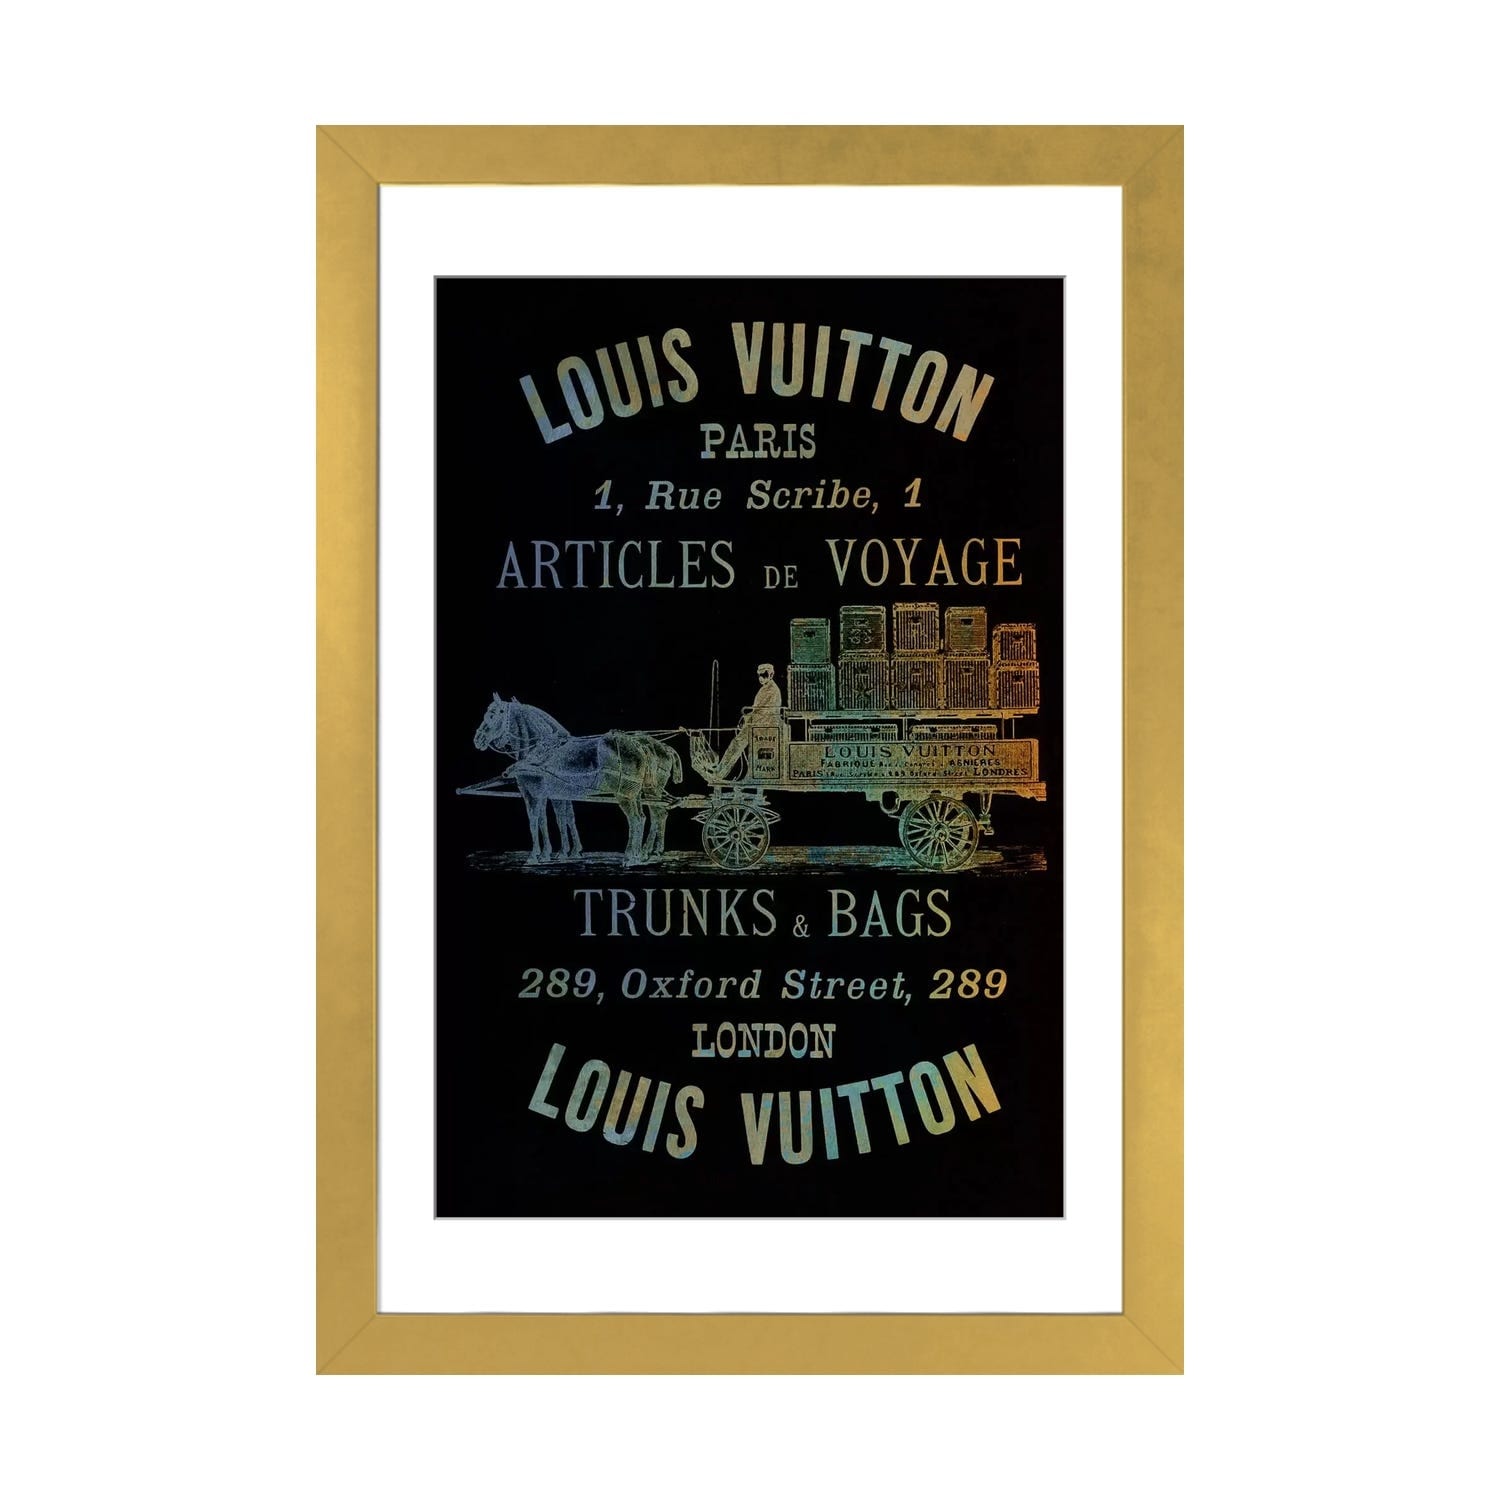 iCanvas 'Vintage Woodgrain Louis Vuitton Sign 4' by 5by5collective